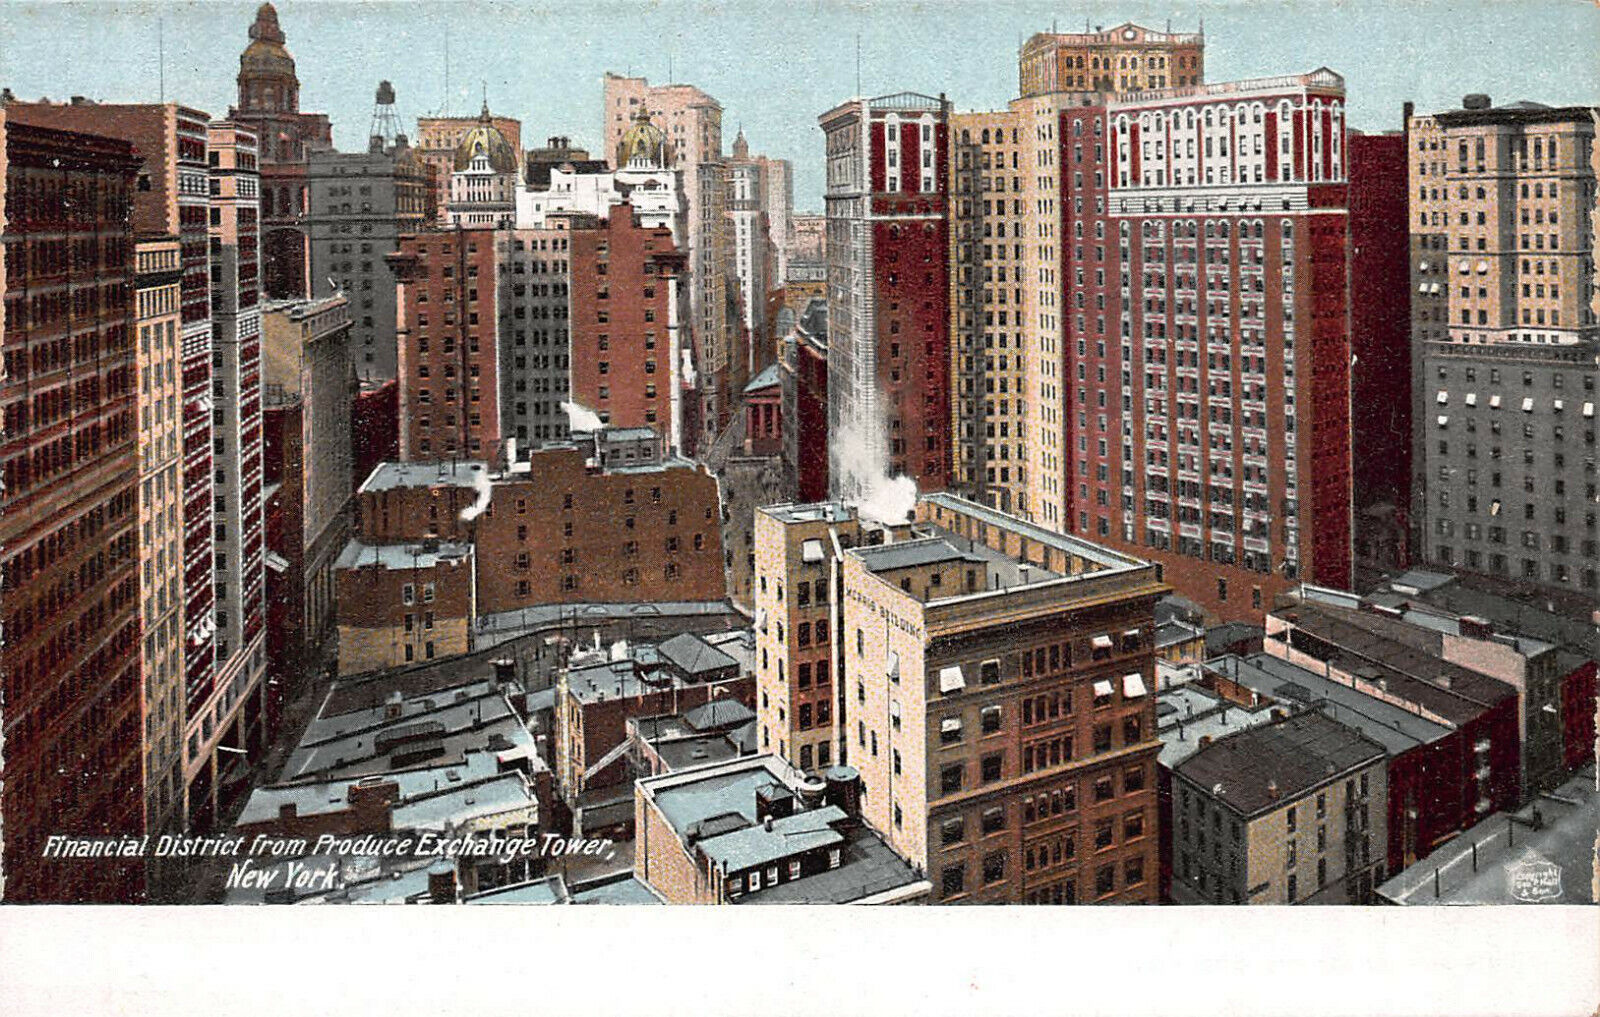 Financial District from Produce Exchange Tower, New York City, Early Postcard